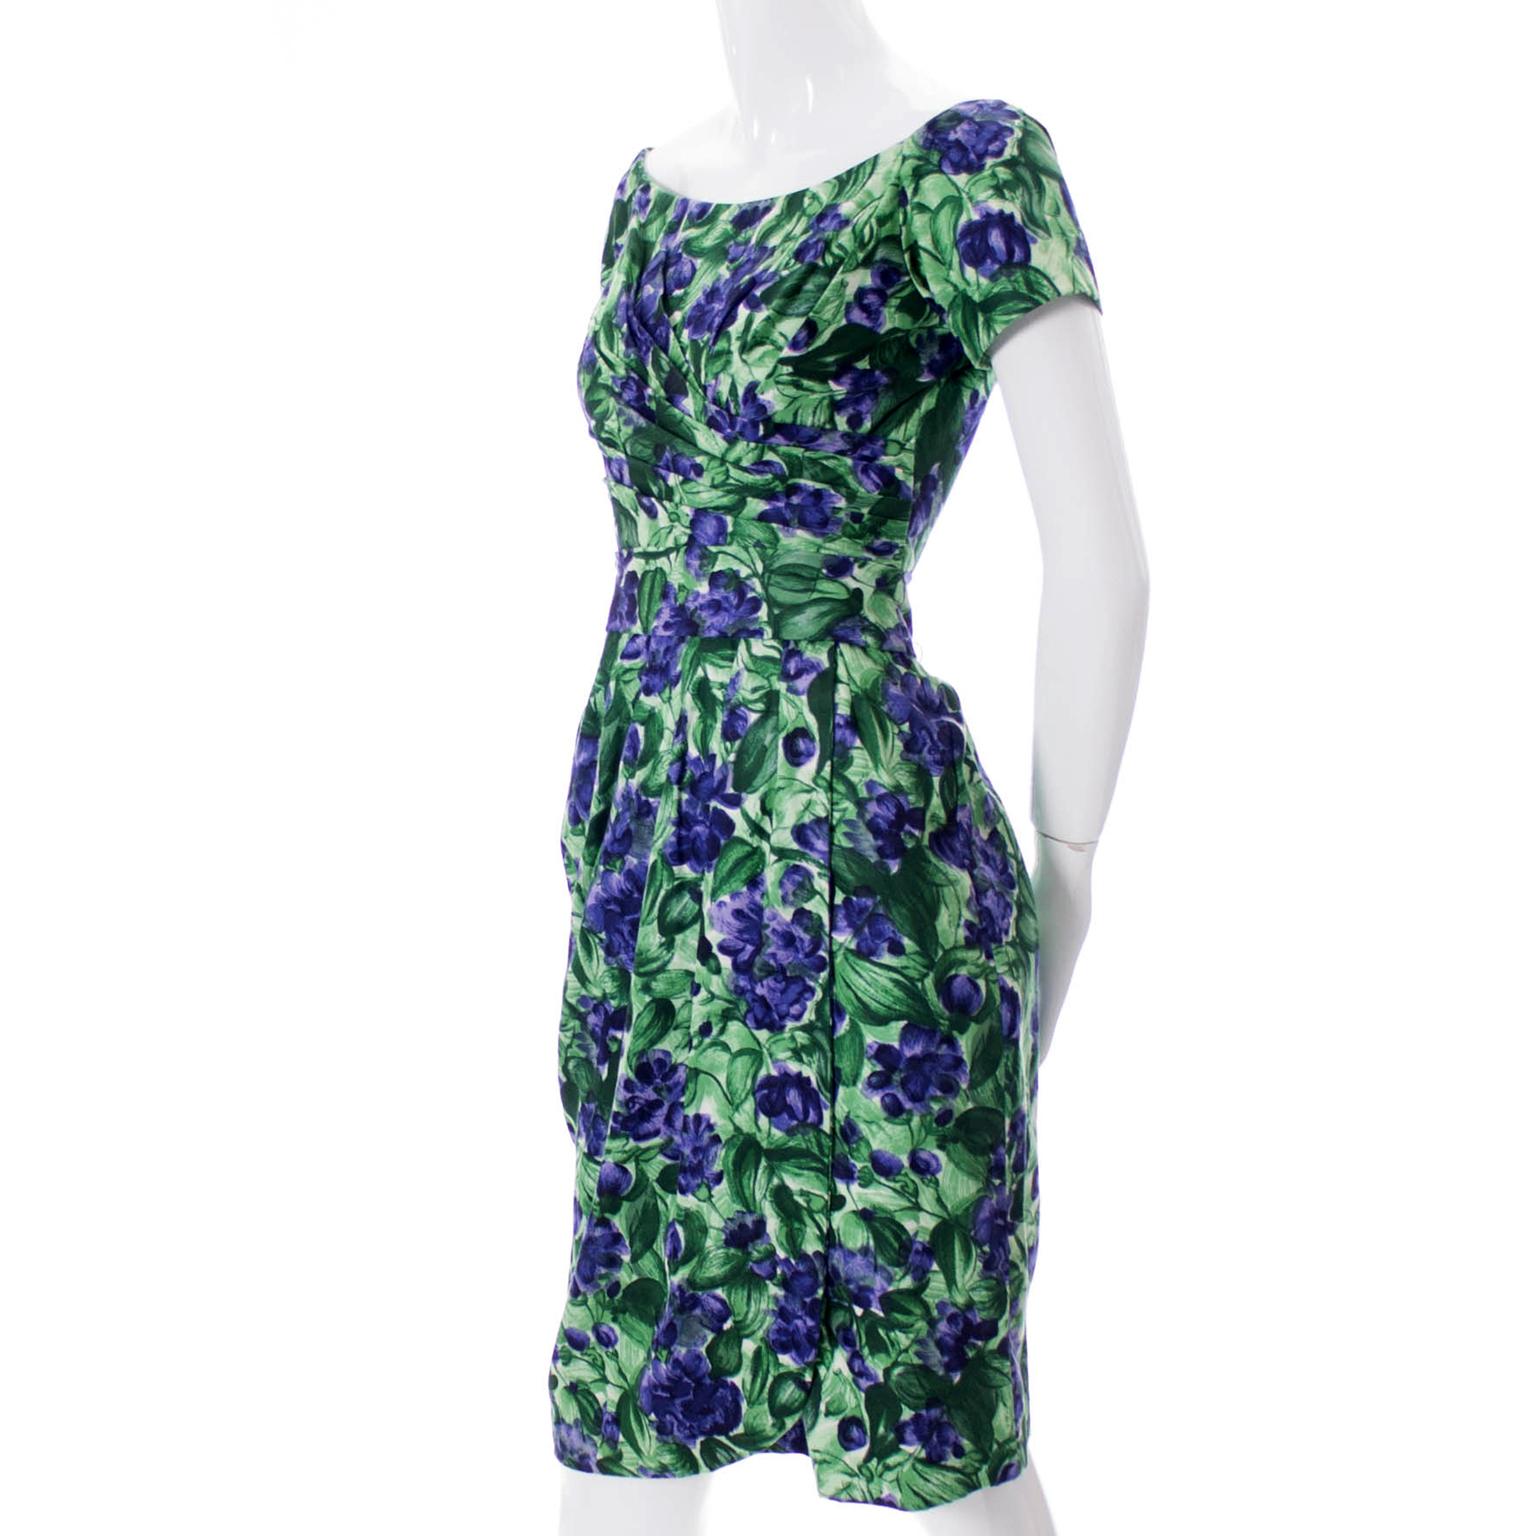 green and purple floral dress